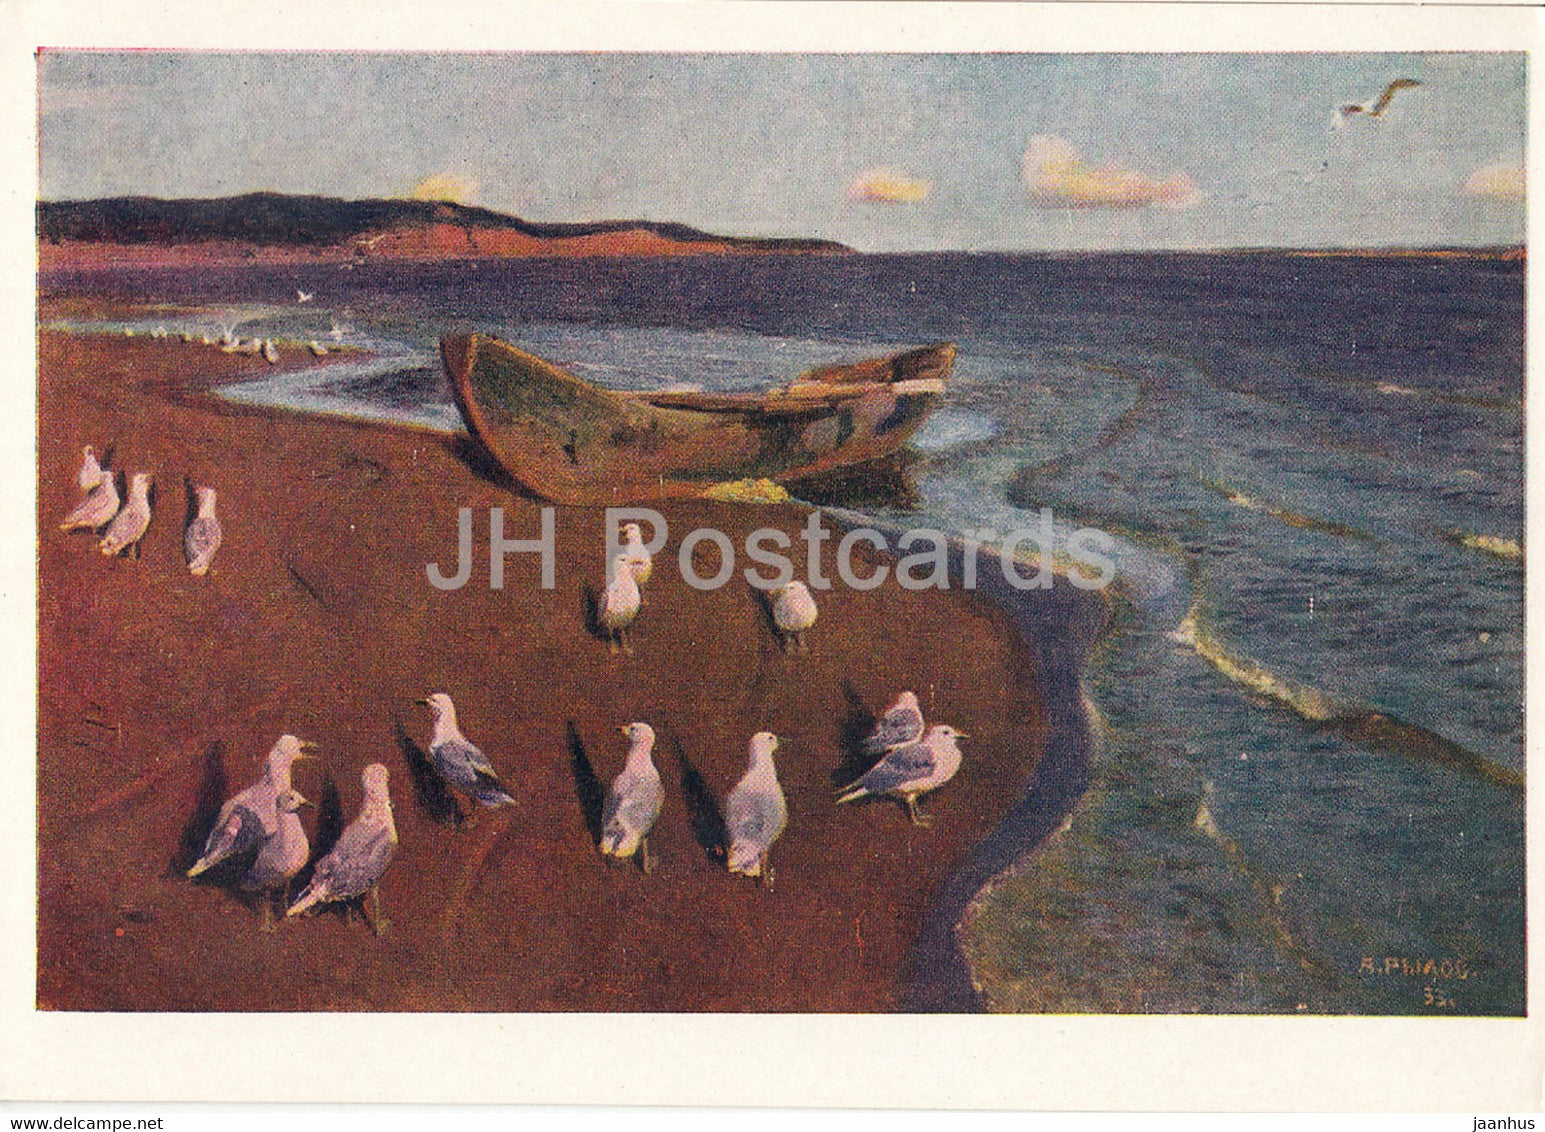 painting by A. Rylov - Seagulls - boat - Russian art - 1961 - Russia USSR - unused - JH Postcards